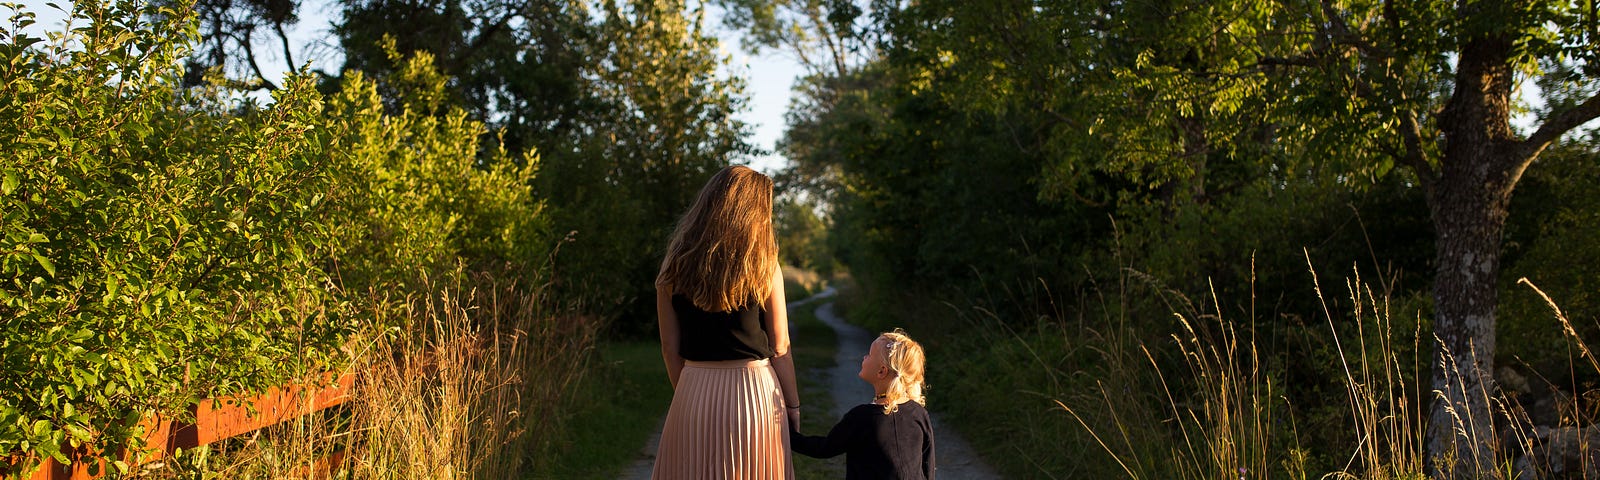 A mother and daughter walking down a dirt path.